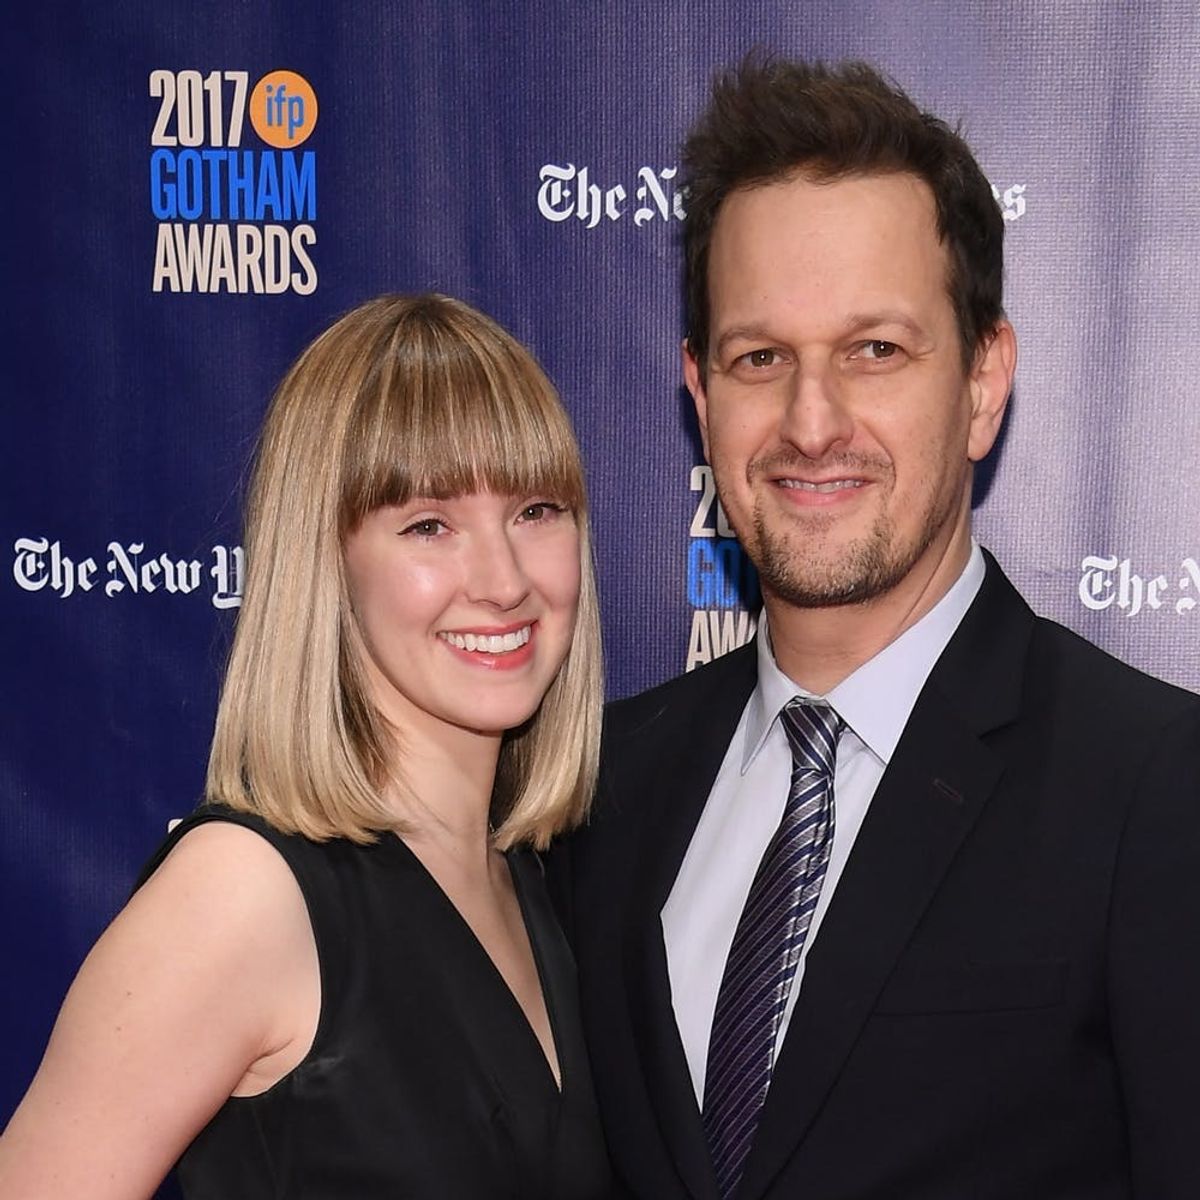 ‘The Good Wife’ Star Josh Charles and Wife Sophie Flack Announced That They’re Expecting in the Most Hilarious Way